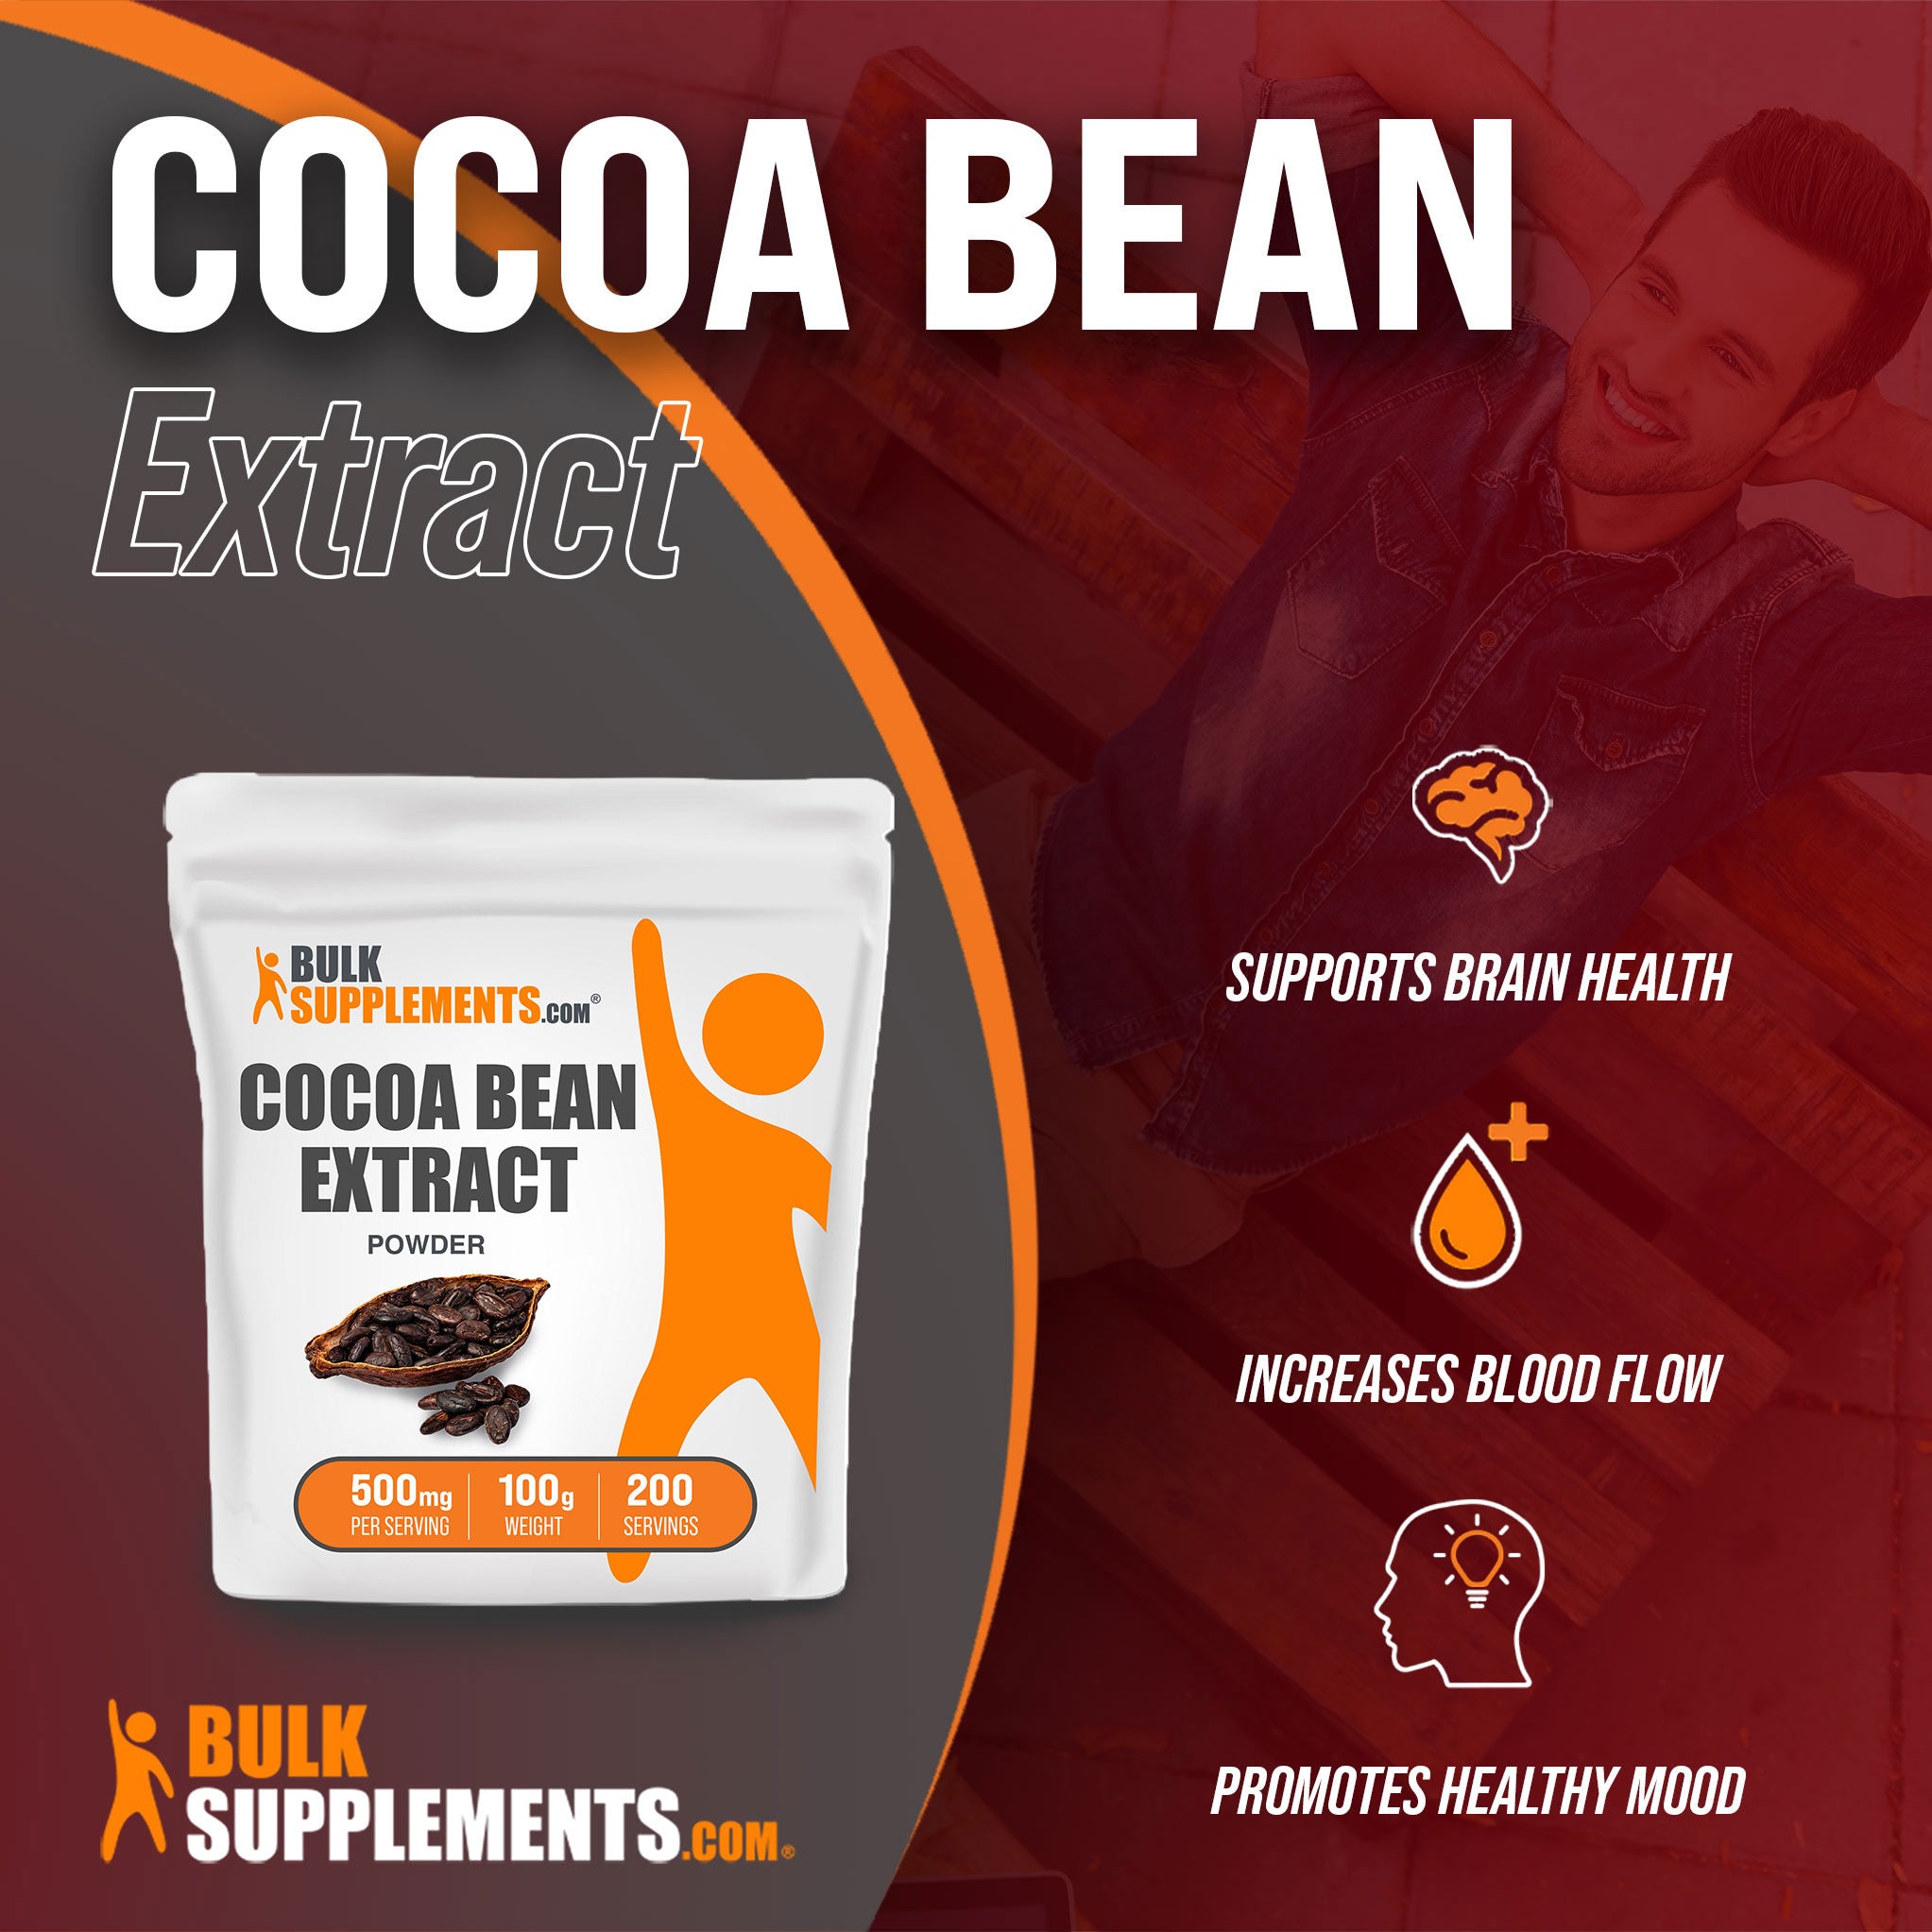 100g Cocoa Bean circulation supplements; supports brain health, increases blood flow, promotes healthy mood